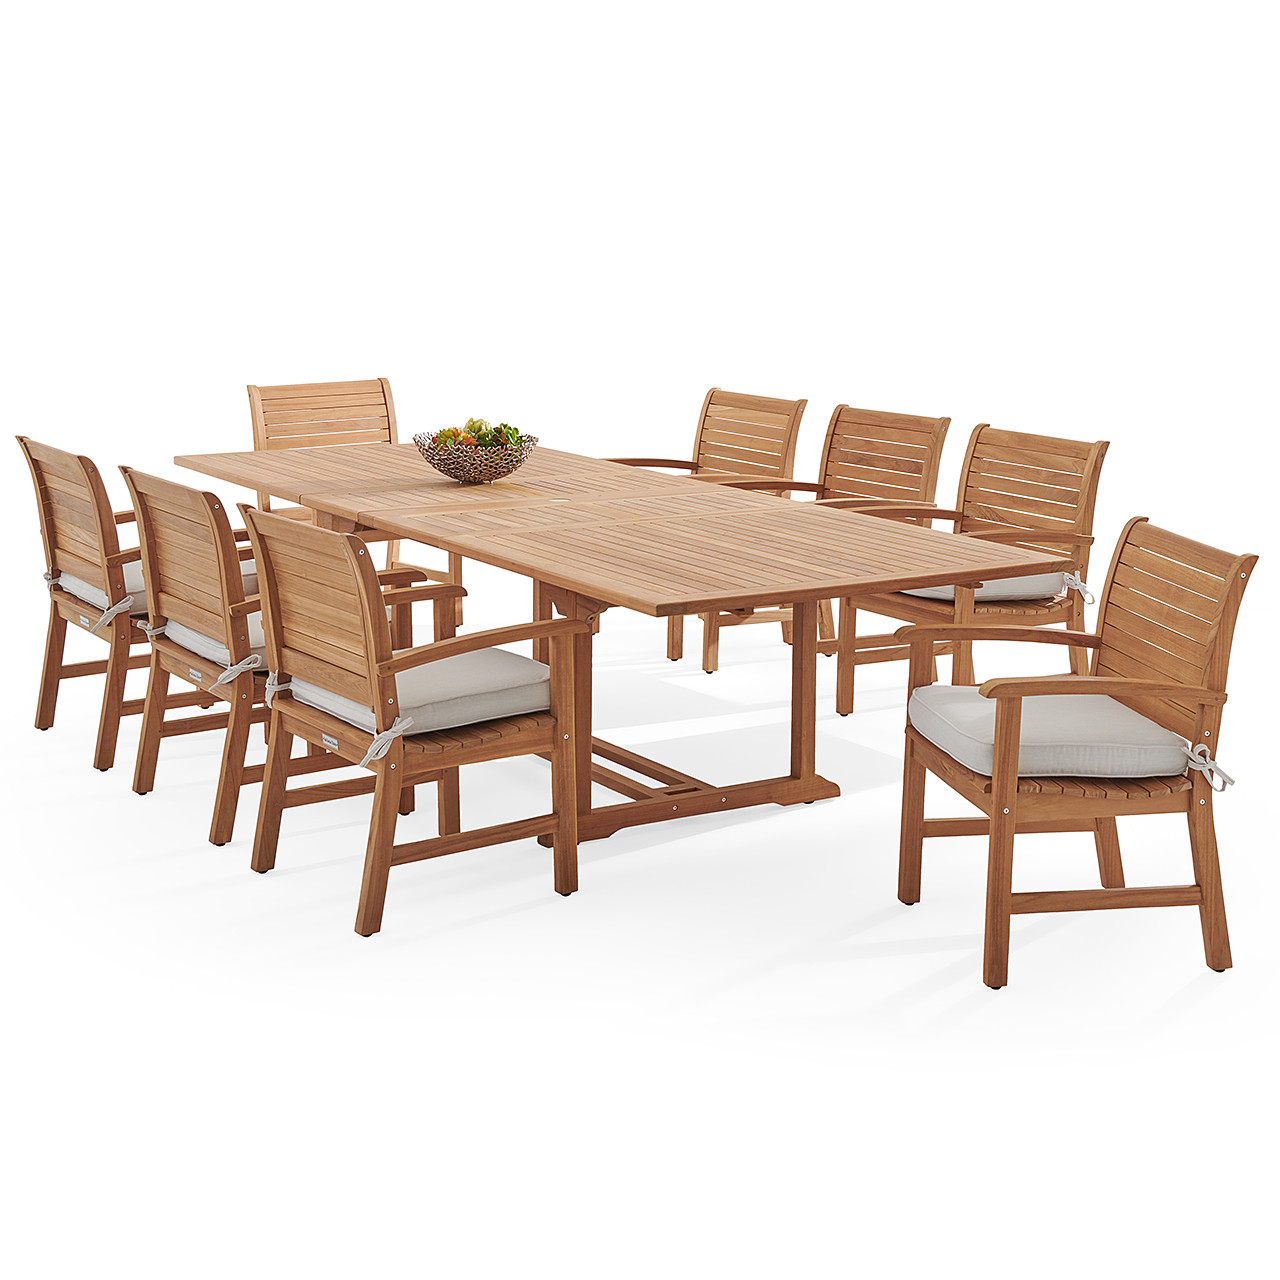 Pembroke Teak with Cushions 9 Piece Dining Set + Bristol 87-118 x 47 in. Extension Table